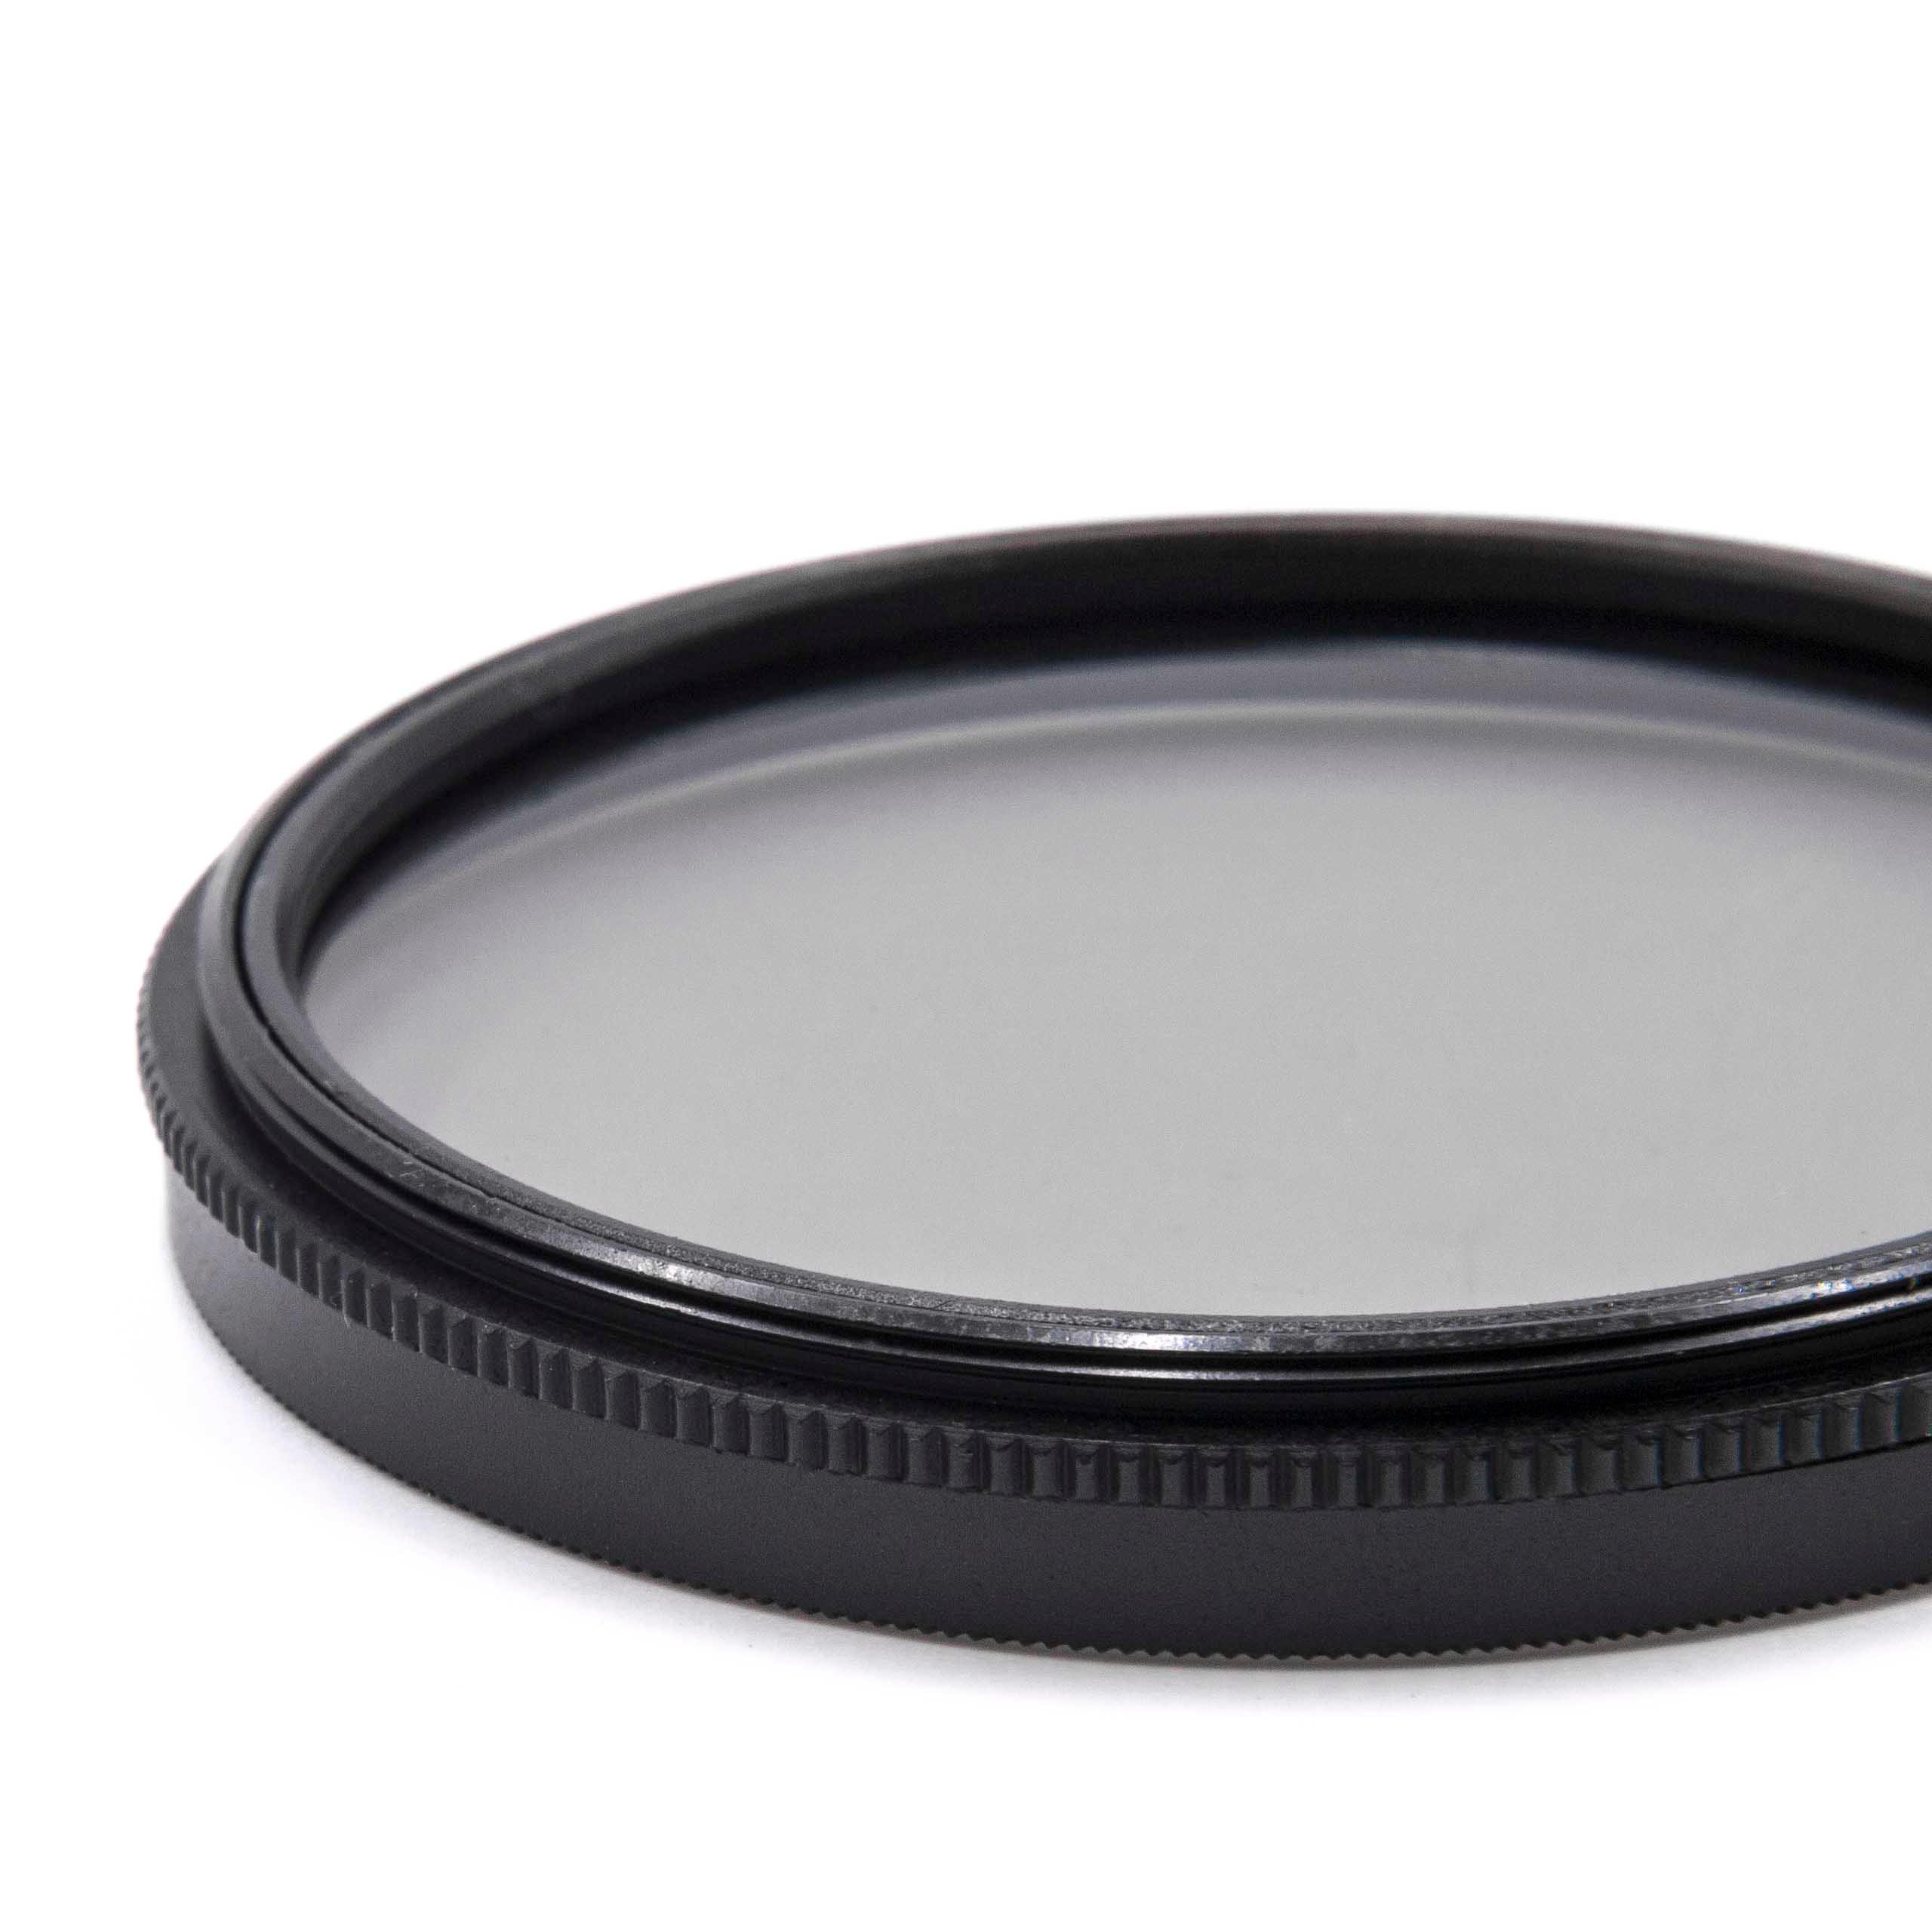 Polarising Filter suitable for Cameras & Lenses with 55 mm Filter Thread - CPL Filter